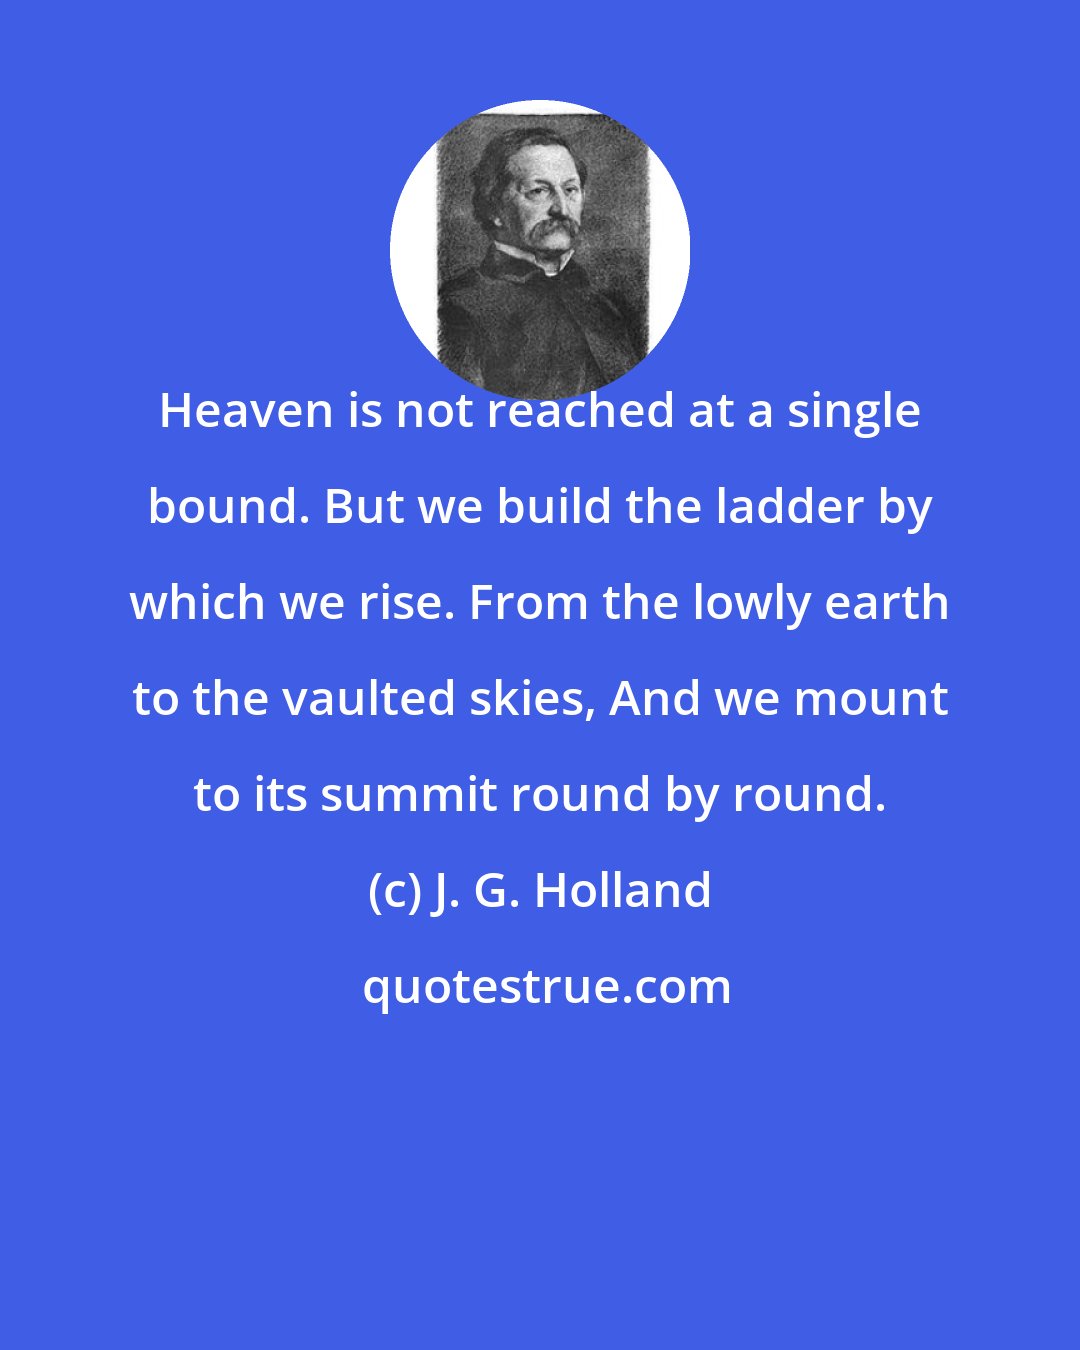 J. G. Holland: Heaven is not reached at a single bound. But we build the ladder by which we rise. From the lowly earth to the vaulted skies, And we mount to its summit round by round.